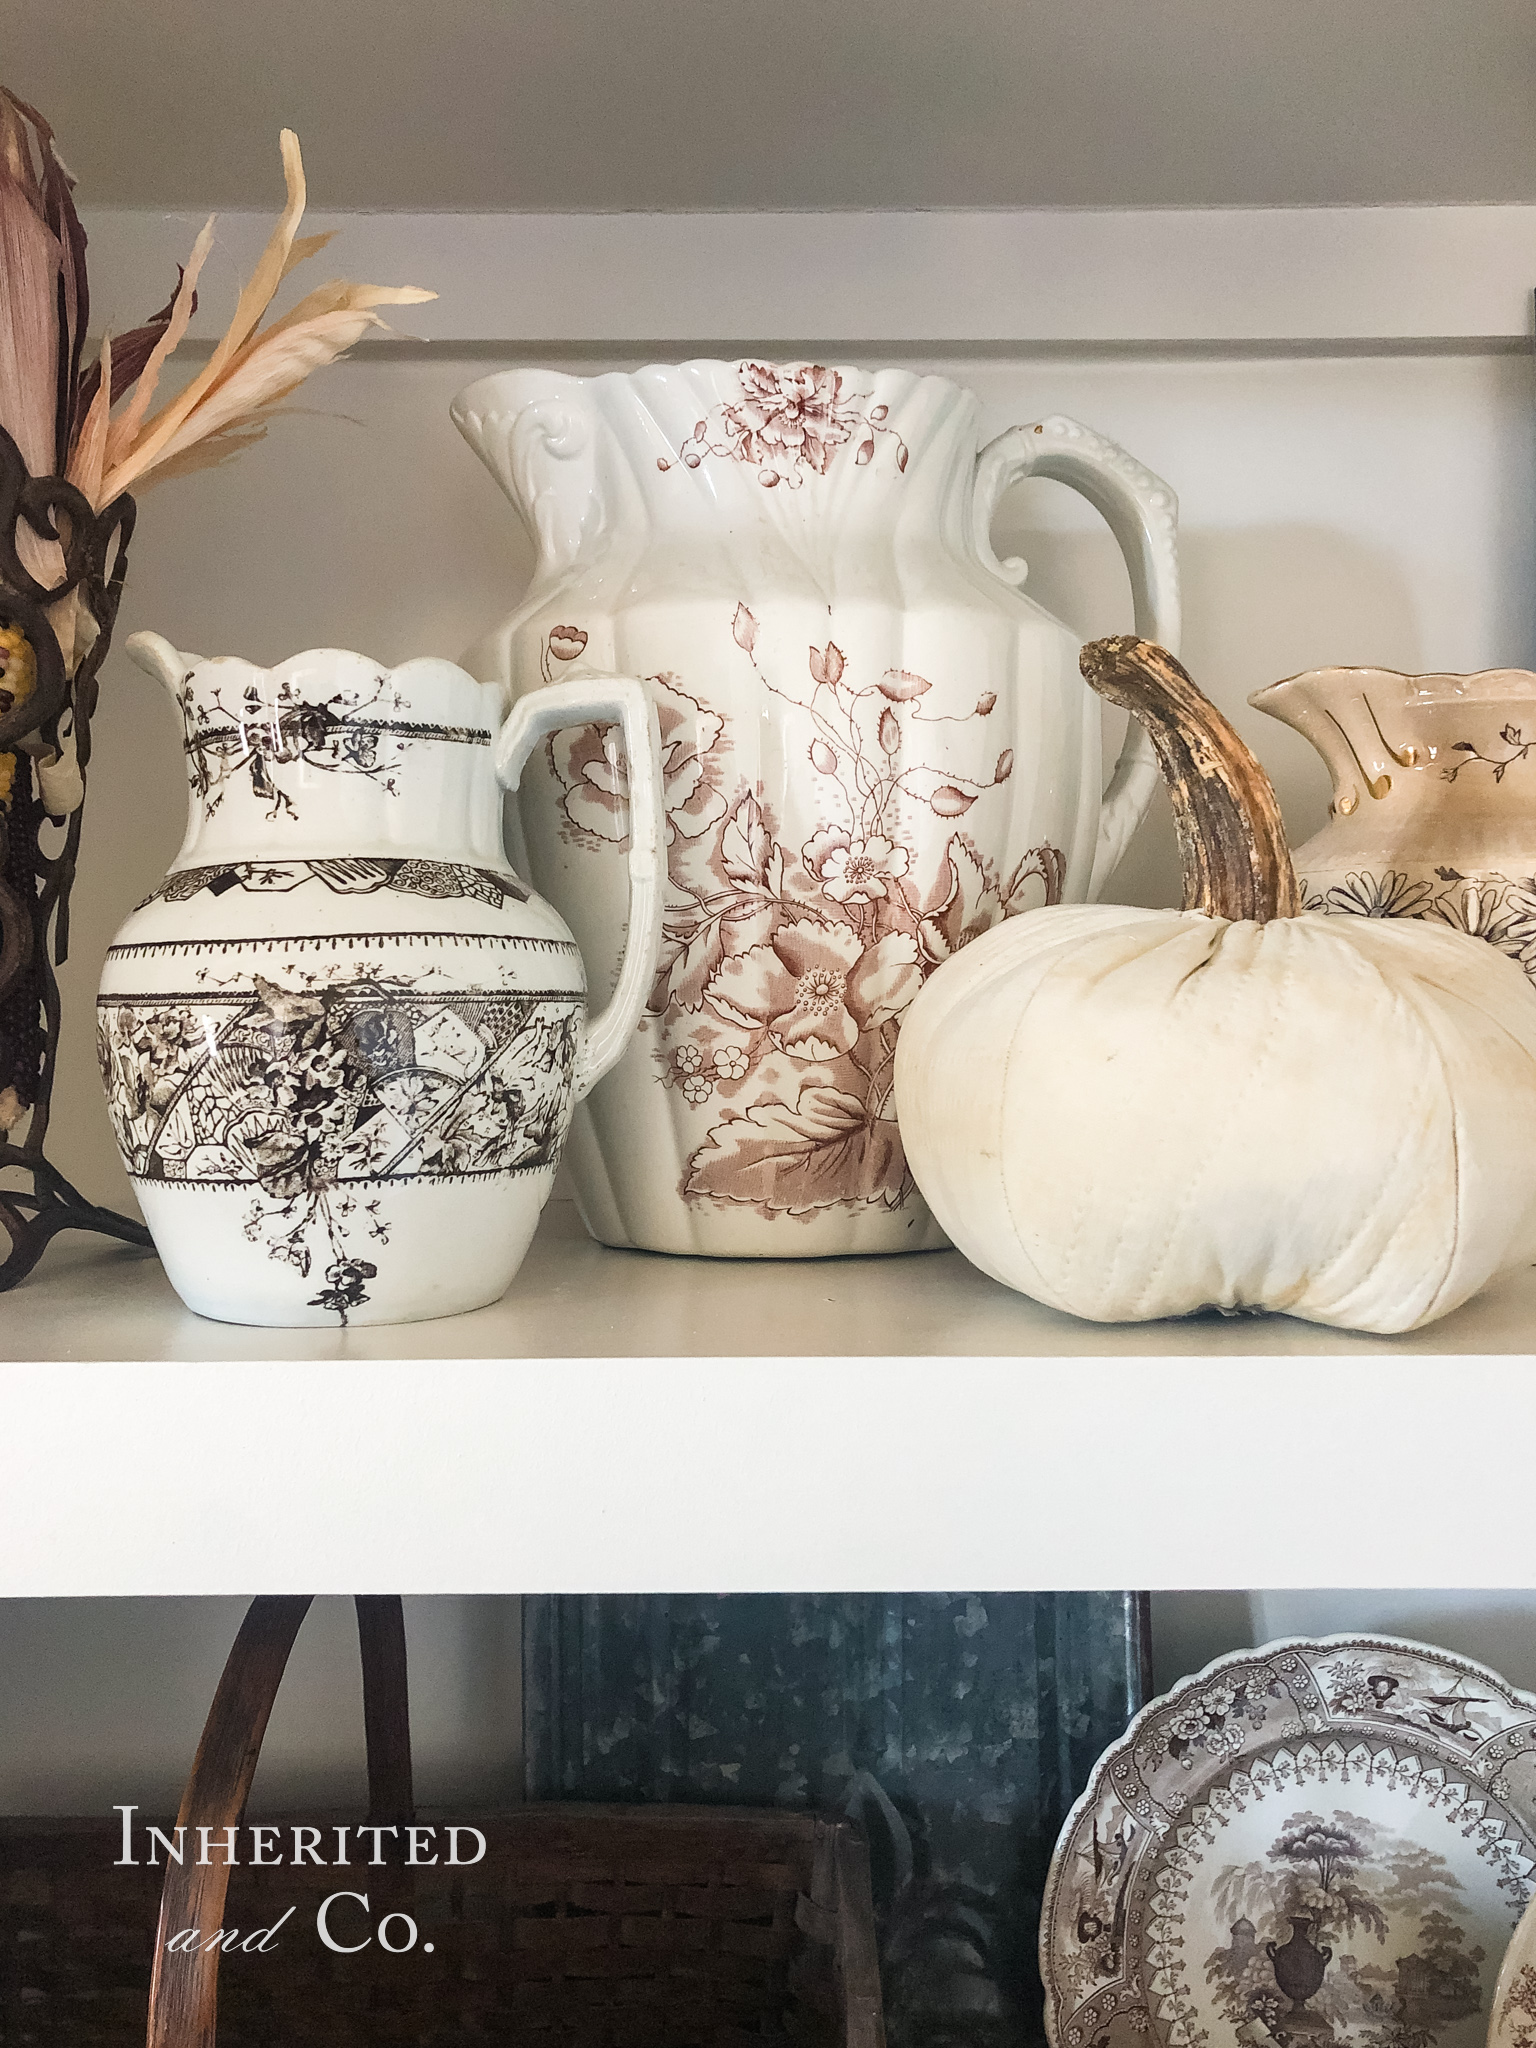 Large antique brown transferware pitcher in the background with a smaller brown transferware pitcher in the foreground and to the left with a quilted pumpkin on the right